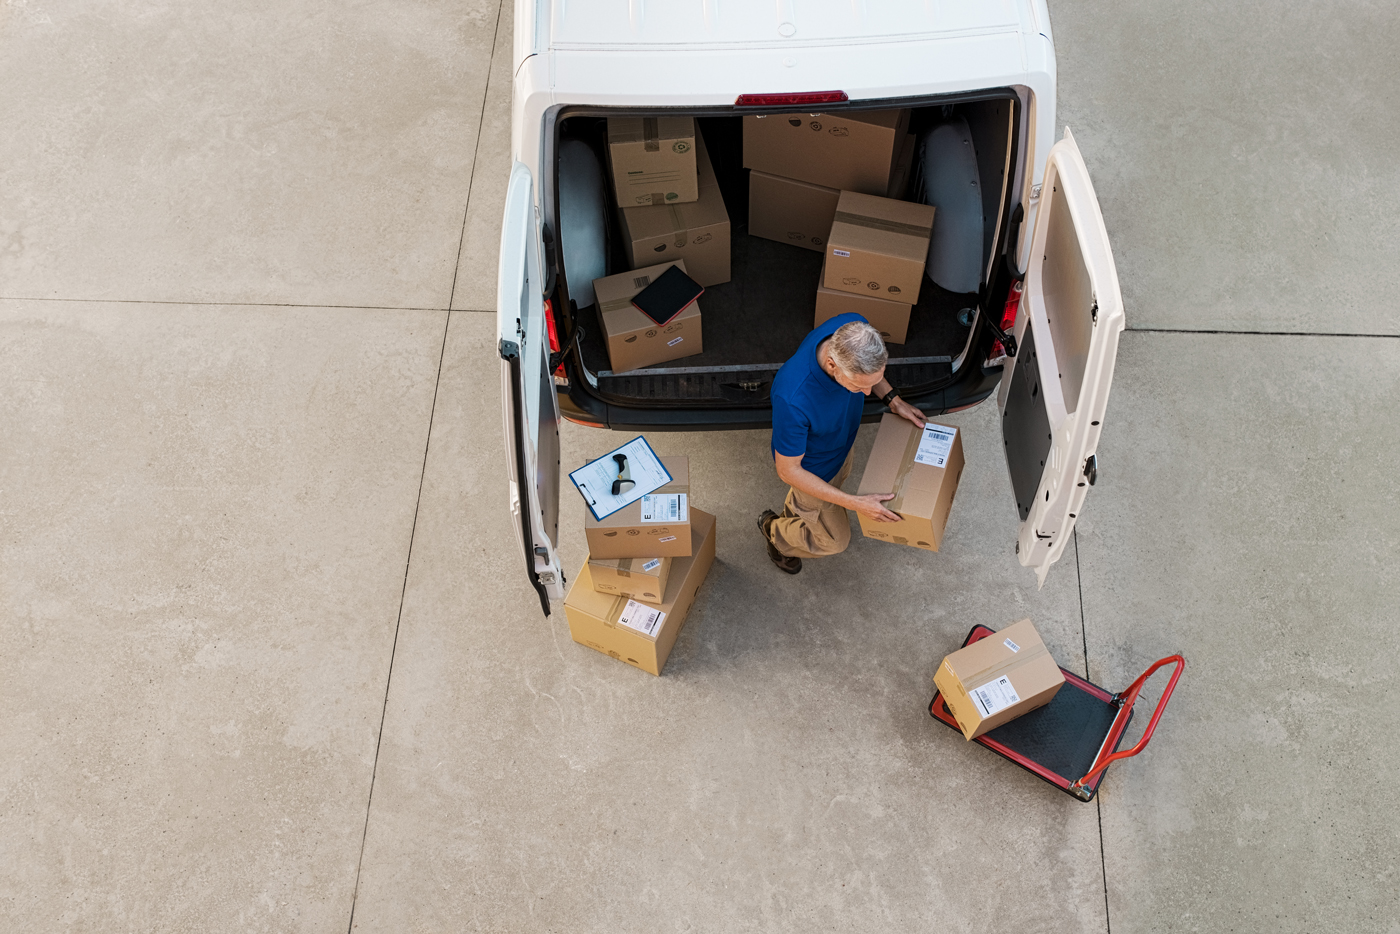 A courier unloading packages from his van with a dolly